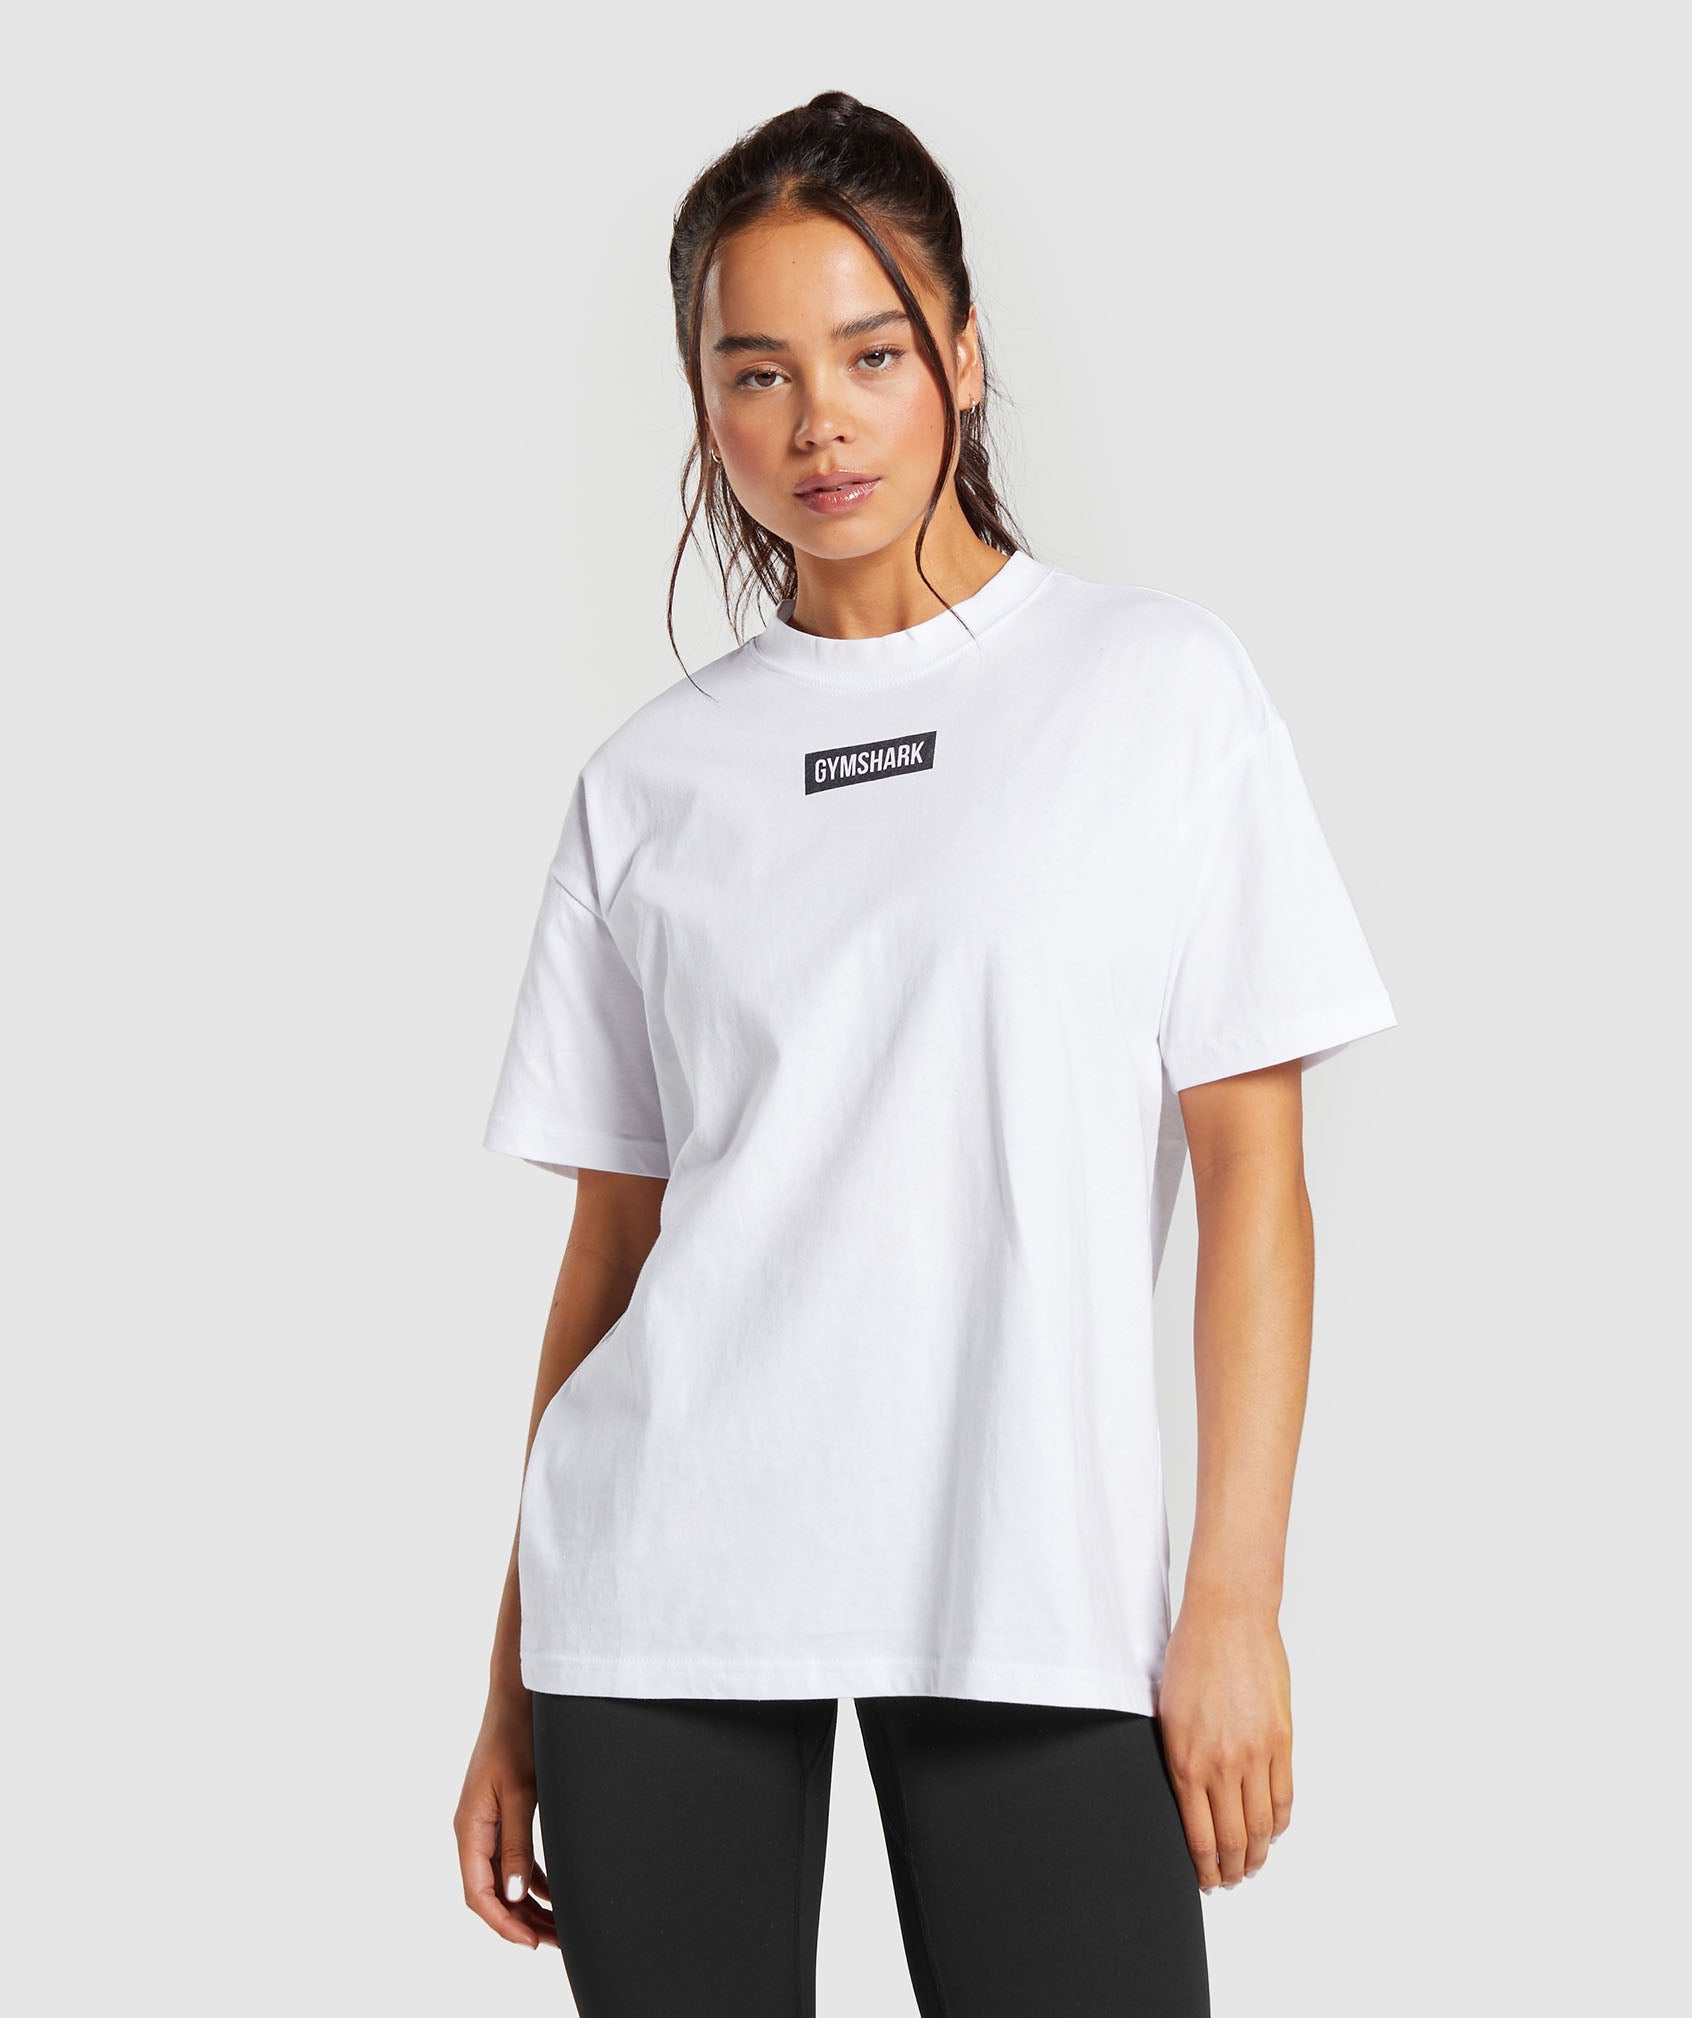 Gym T-Shirts Gymshark - Gym Tops Women & for